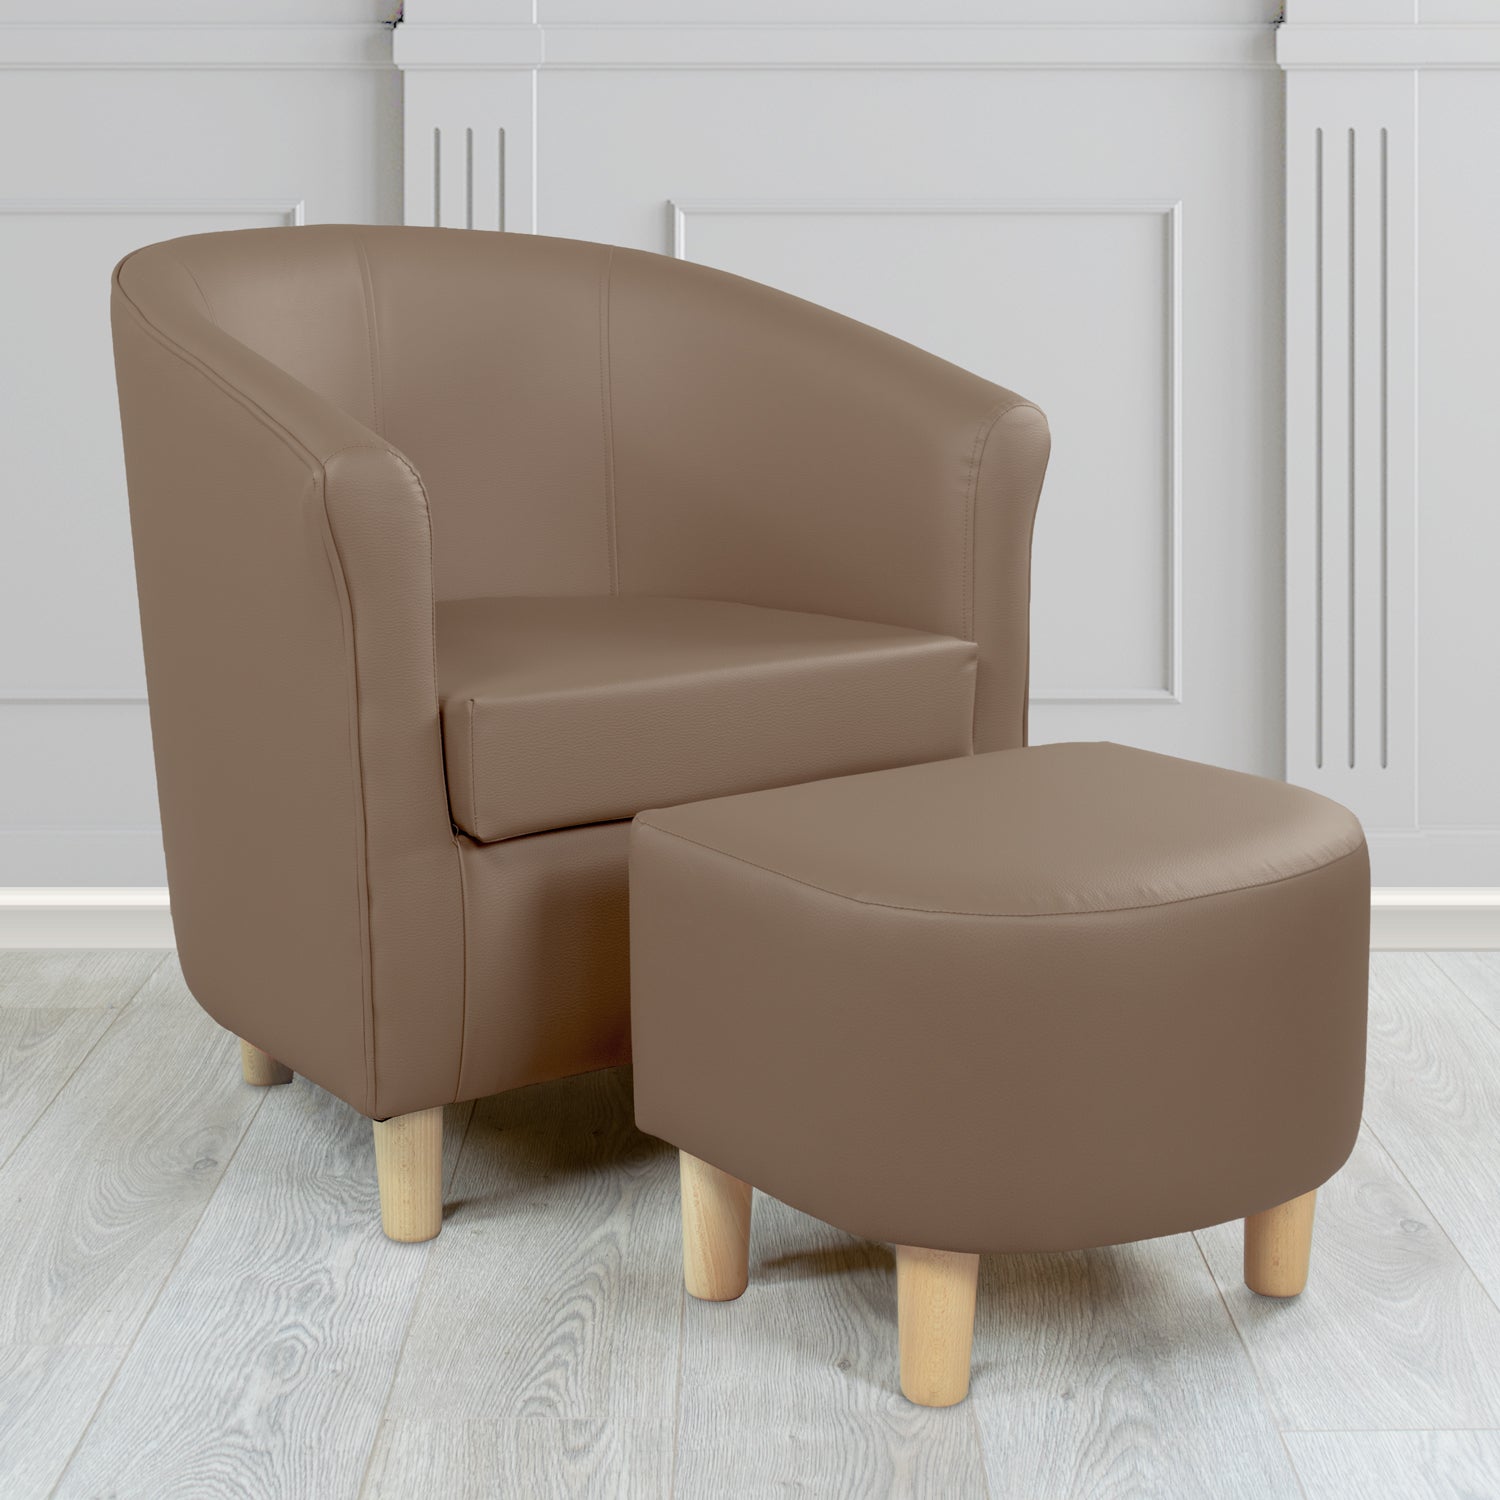 Tuscany Just Colour Pecan Faux Leather Tub Chair with Footstool Set - The Tub Chair Shop